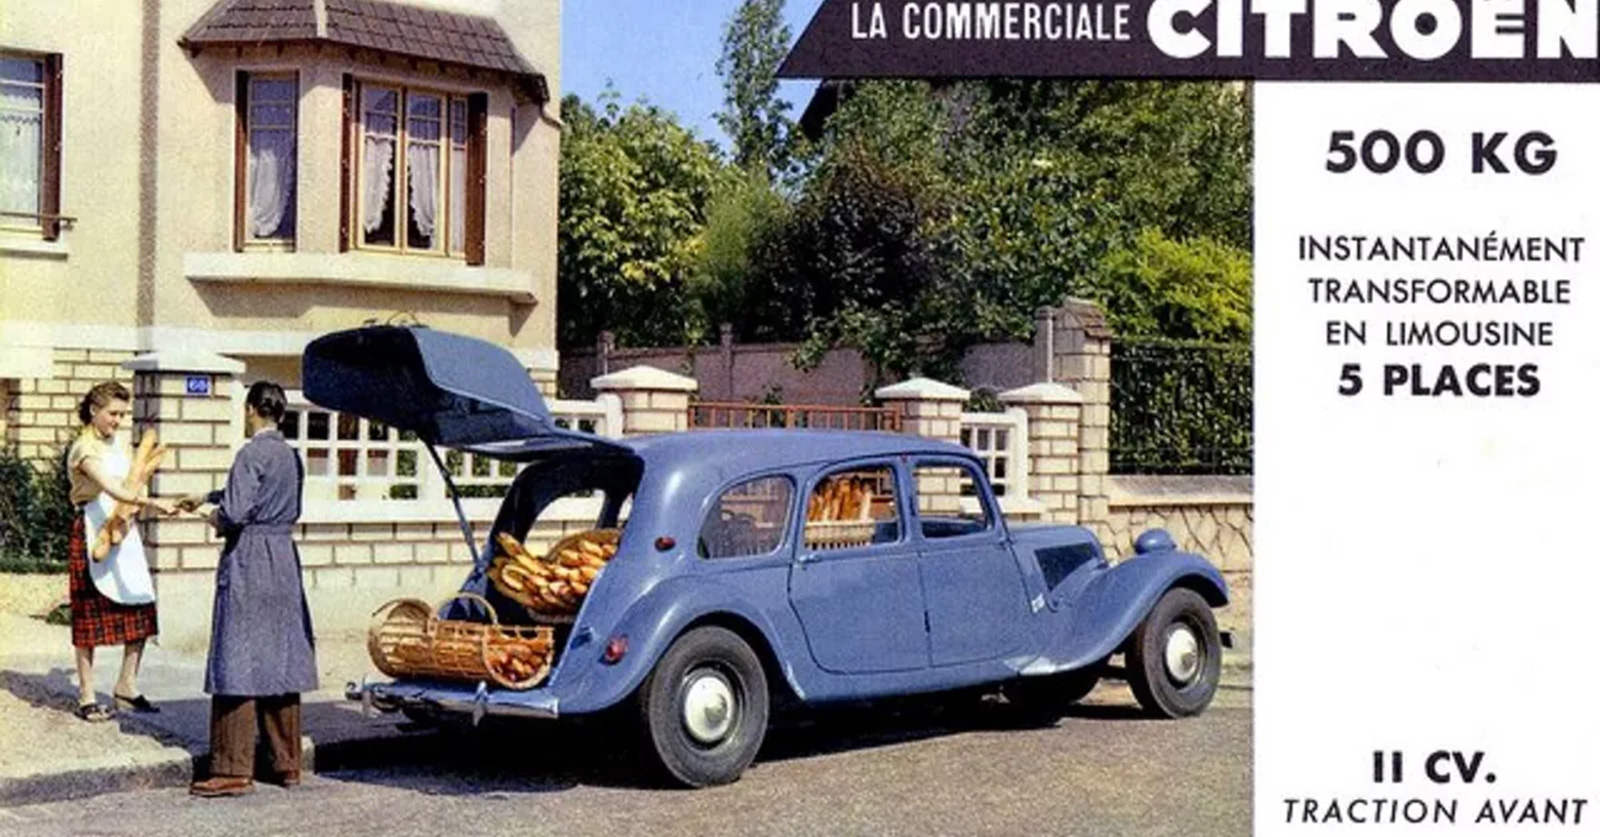 The trunk and little-known things: Mercedes changed everything - Photo 4.